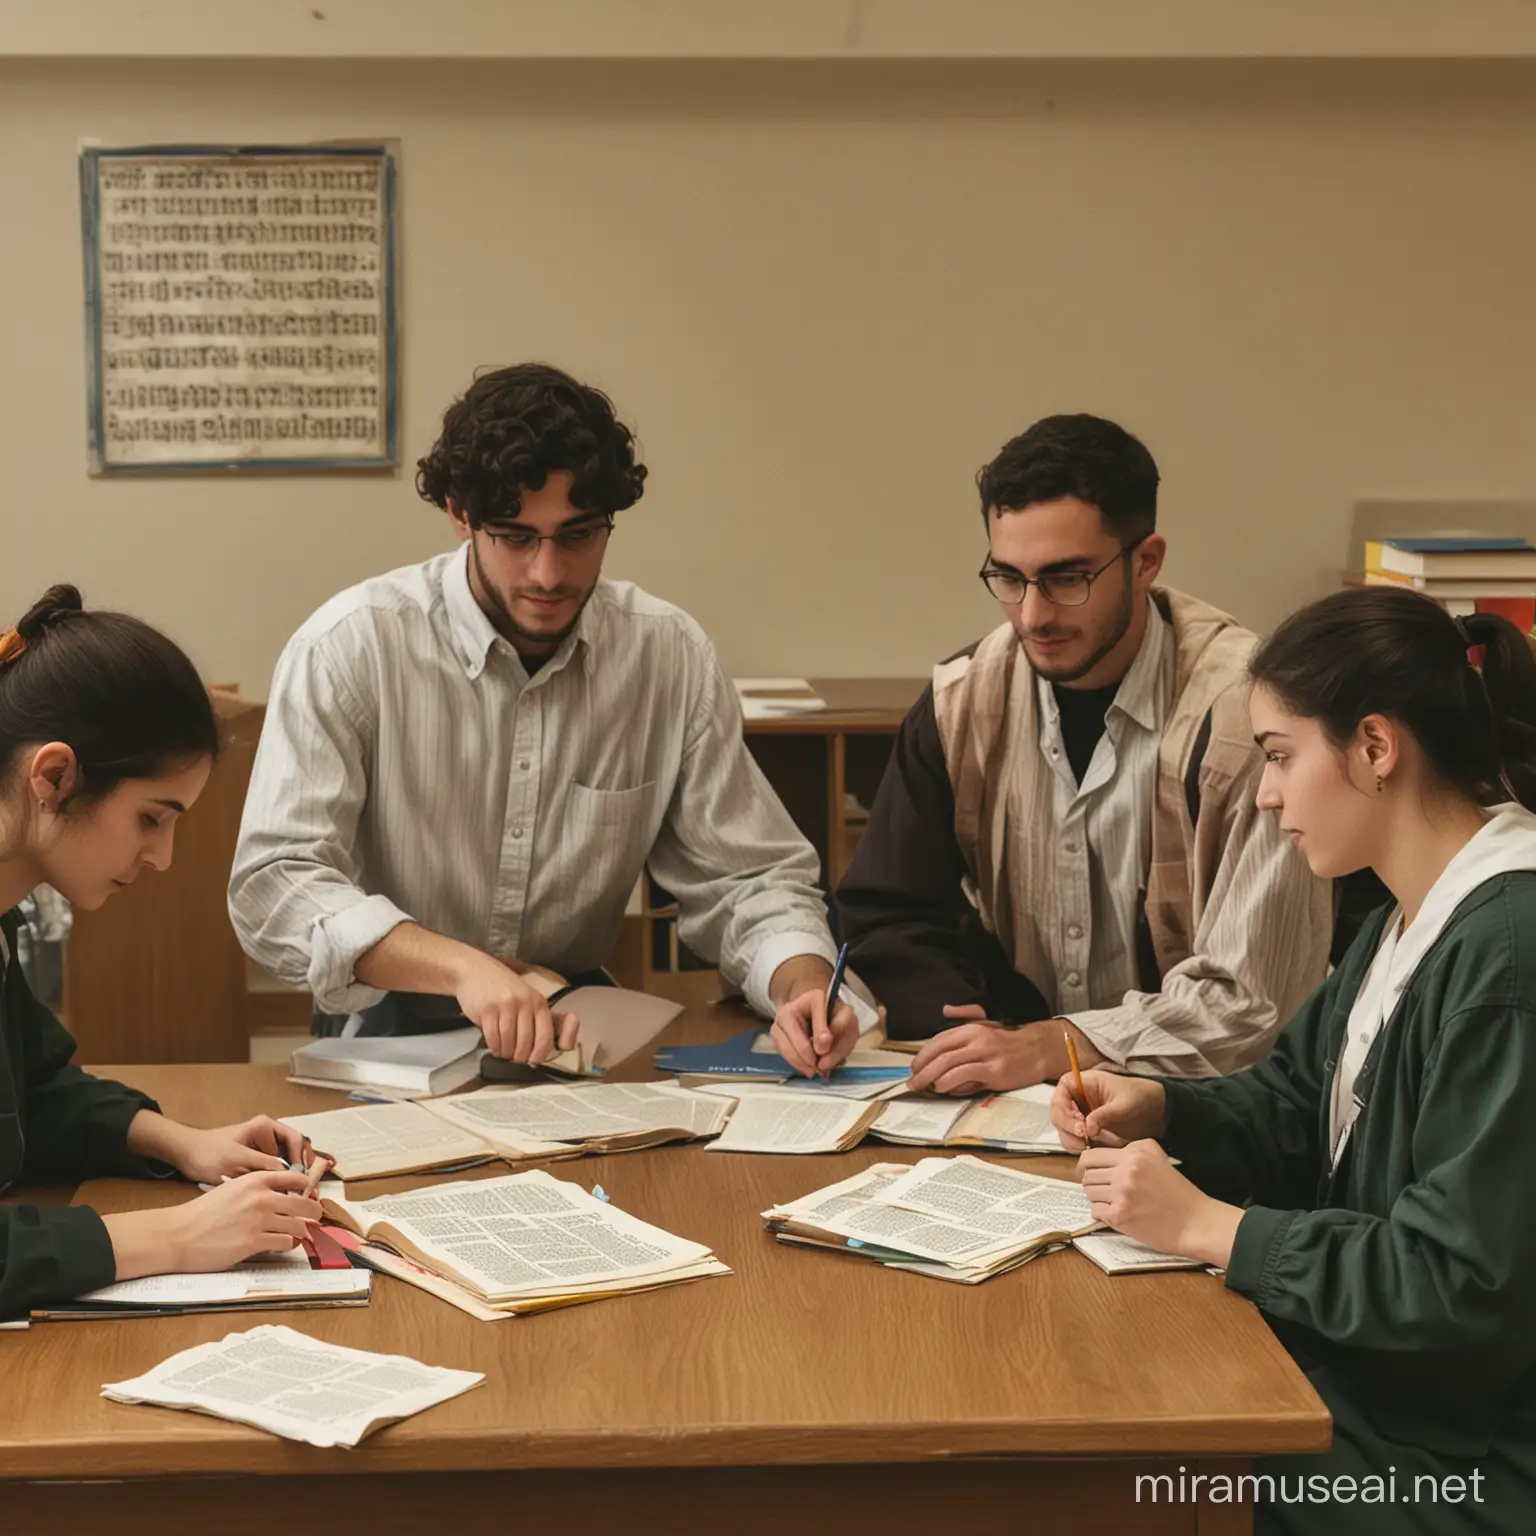 students in the university studying hebrew color
